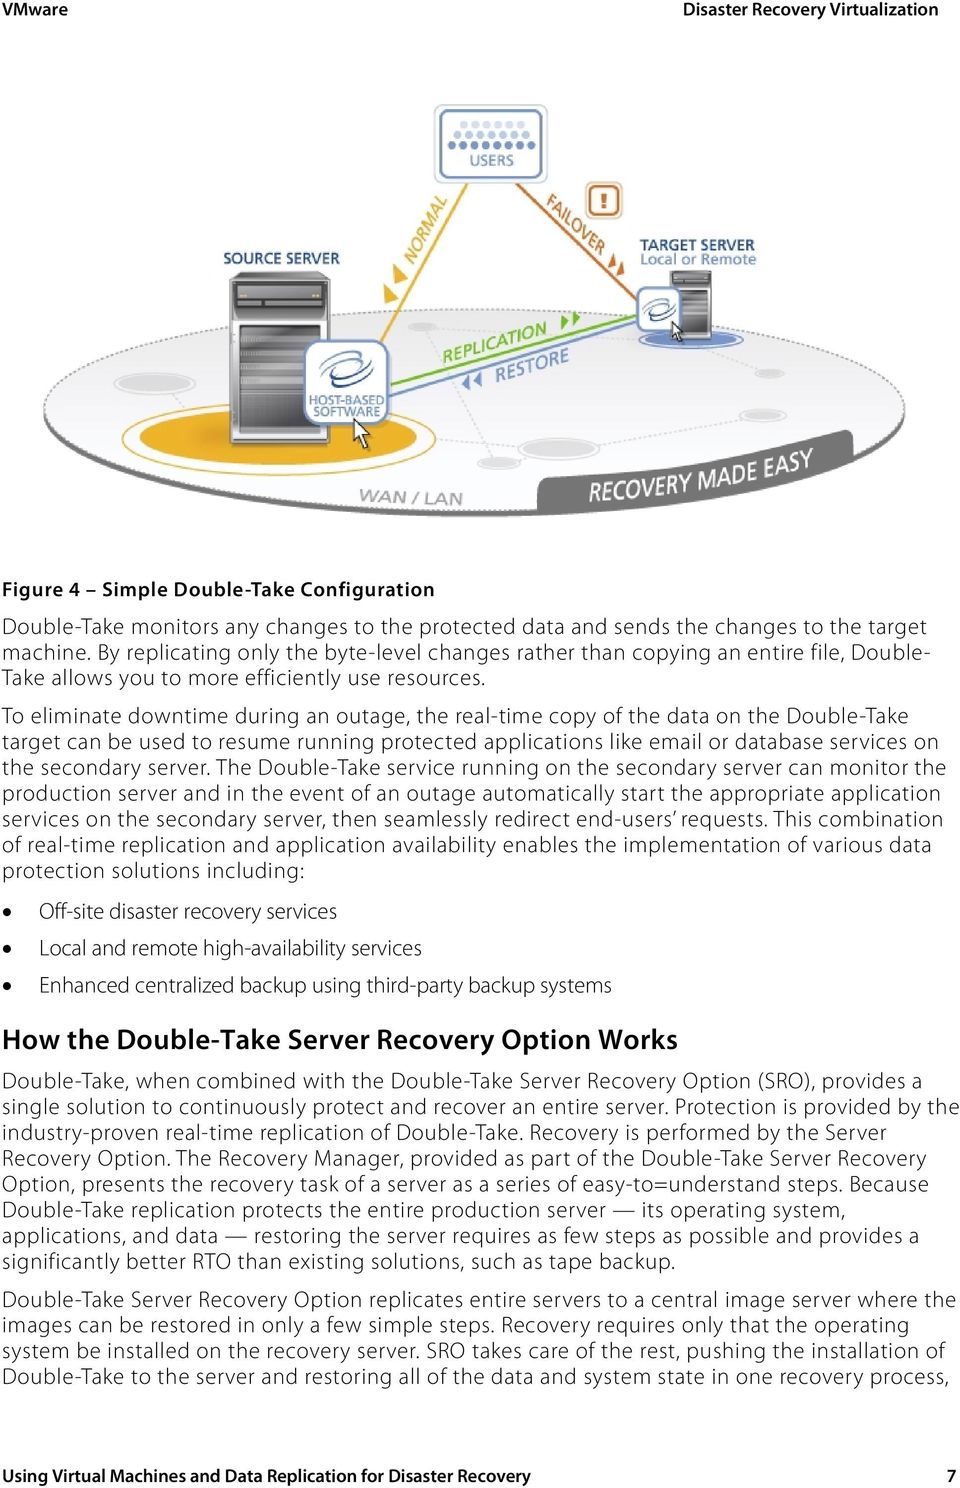 To eliminate downtime during an outage, the real-time copy of the data on the Double-Take target can be used to resume running protected applications like email or database services on the secondary